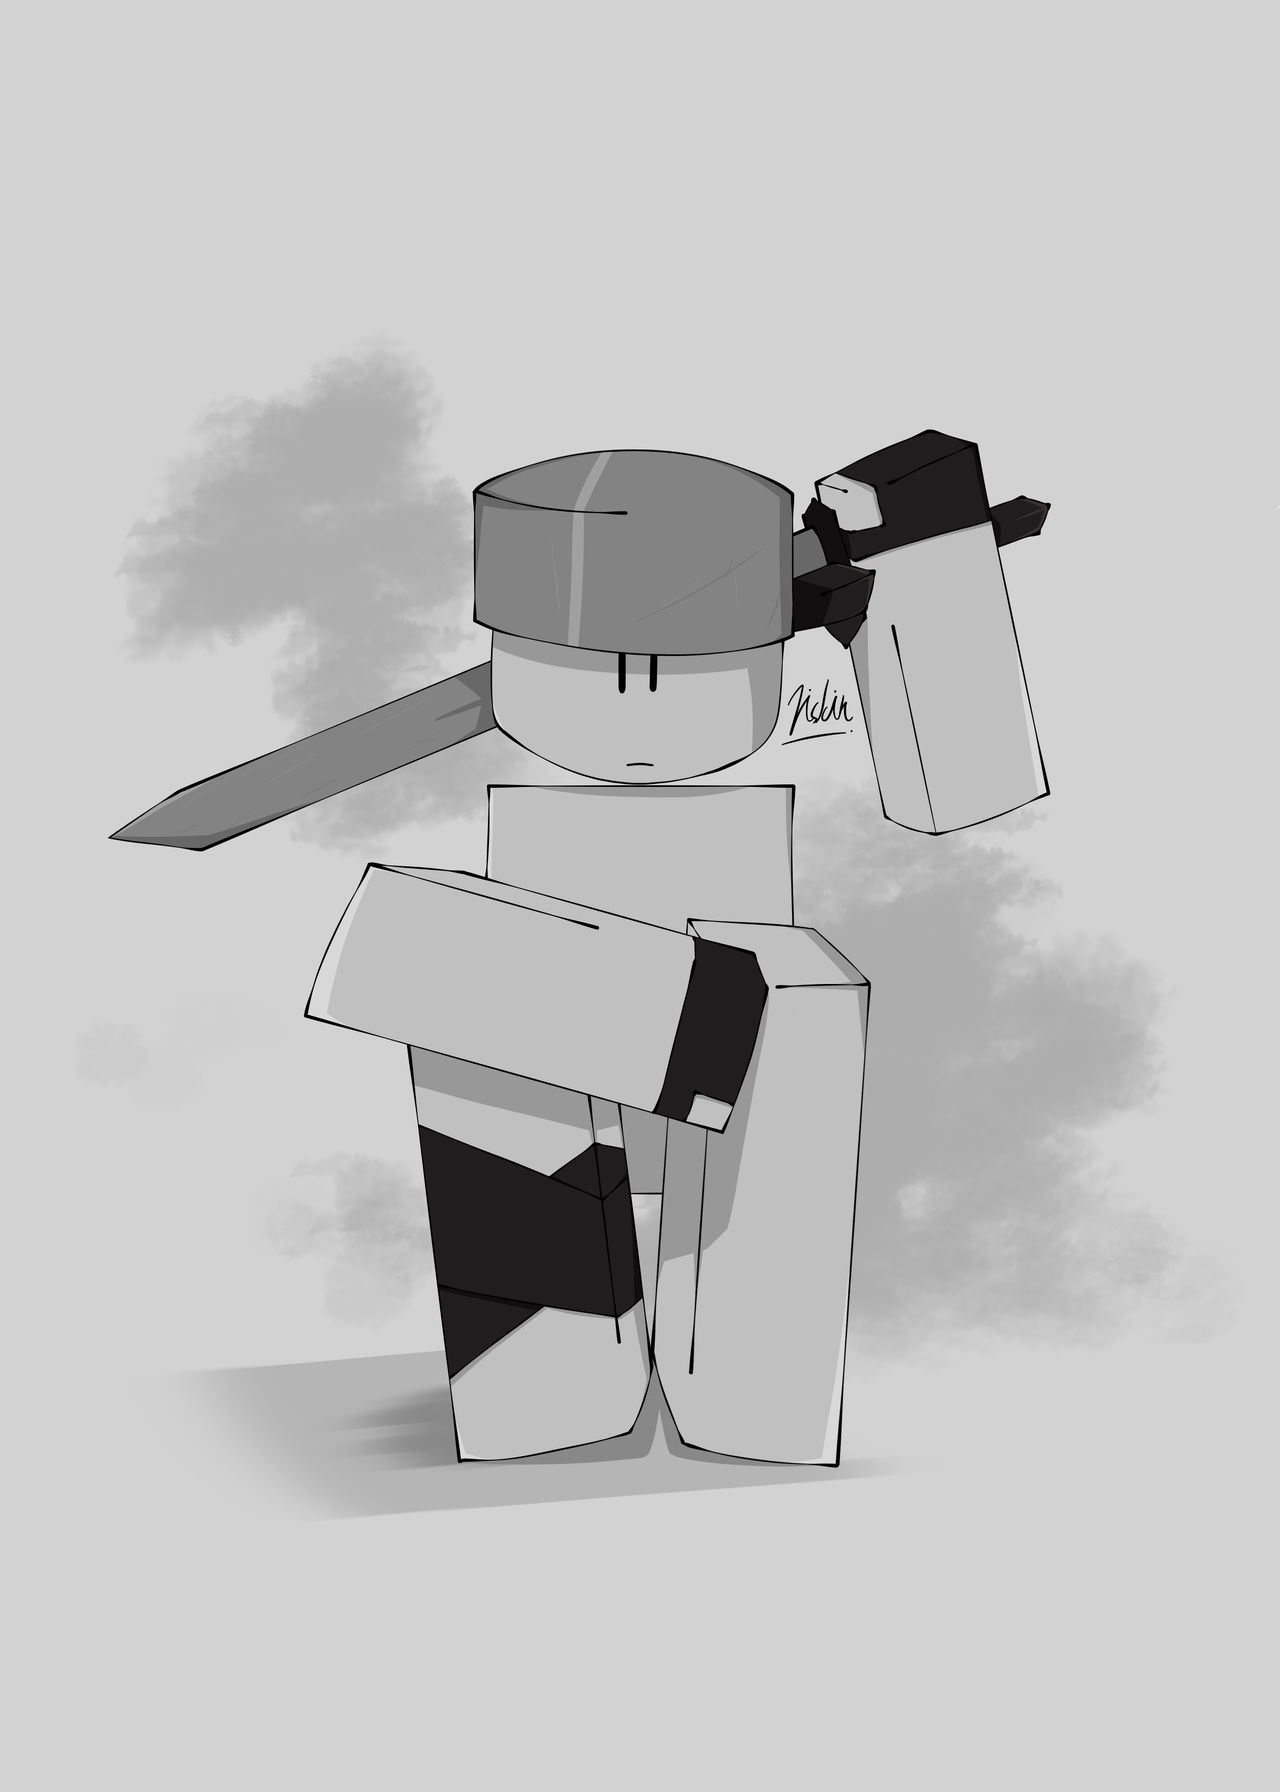 Boom. Art done by me. From Dummies VS noobs : r/roblox